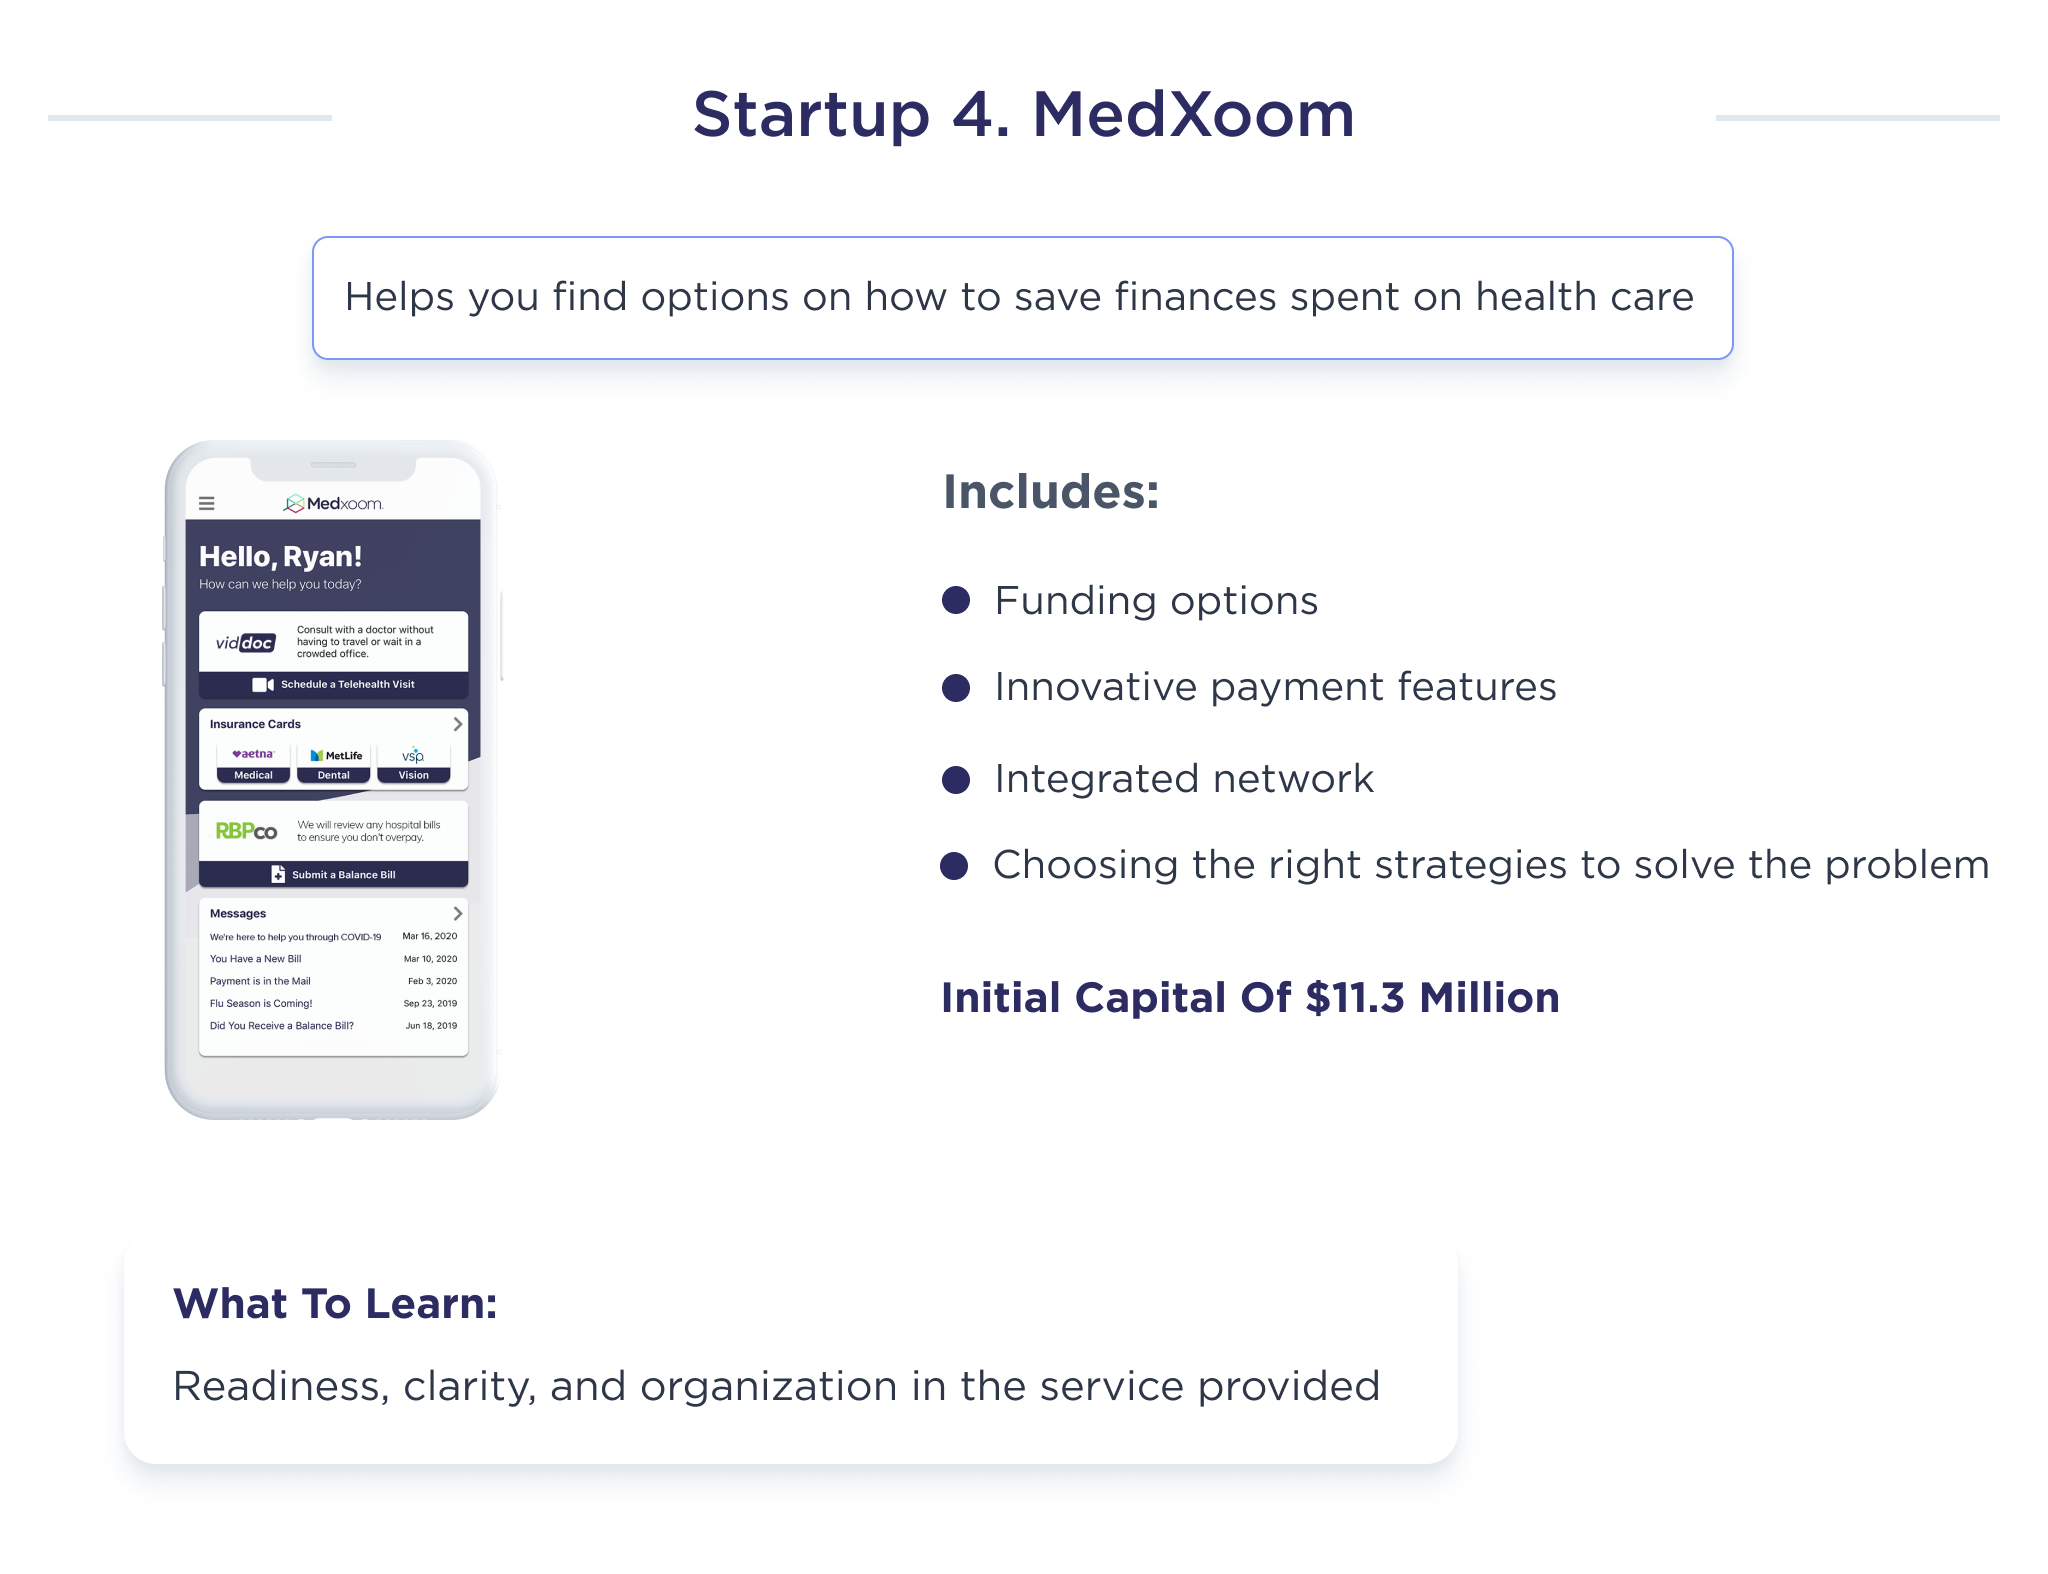 This picture describes the constituent elements that detail the benefits of fintech startup MedXoom